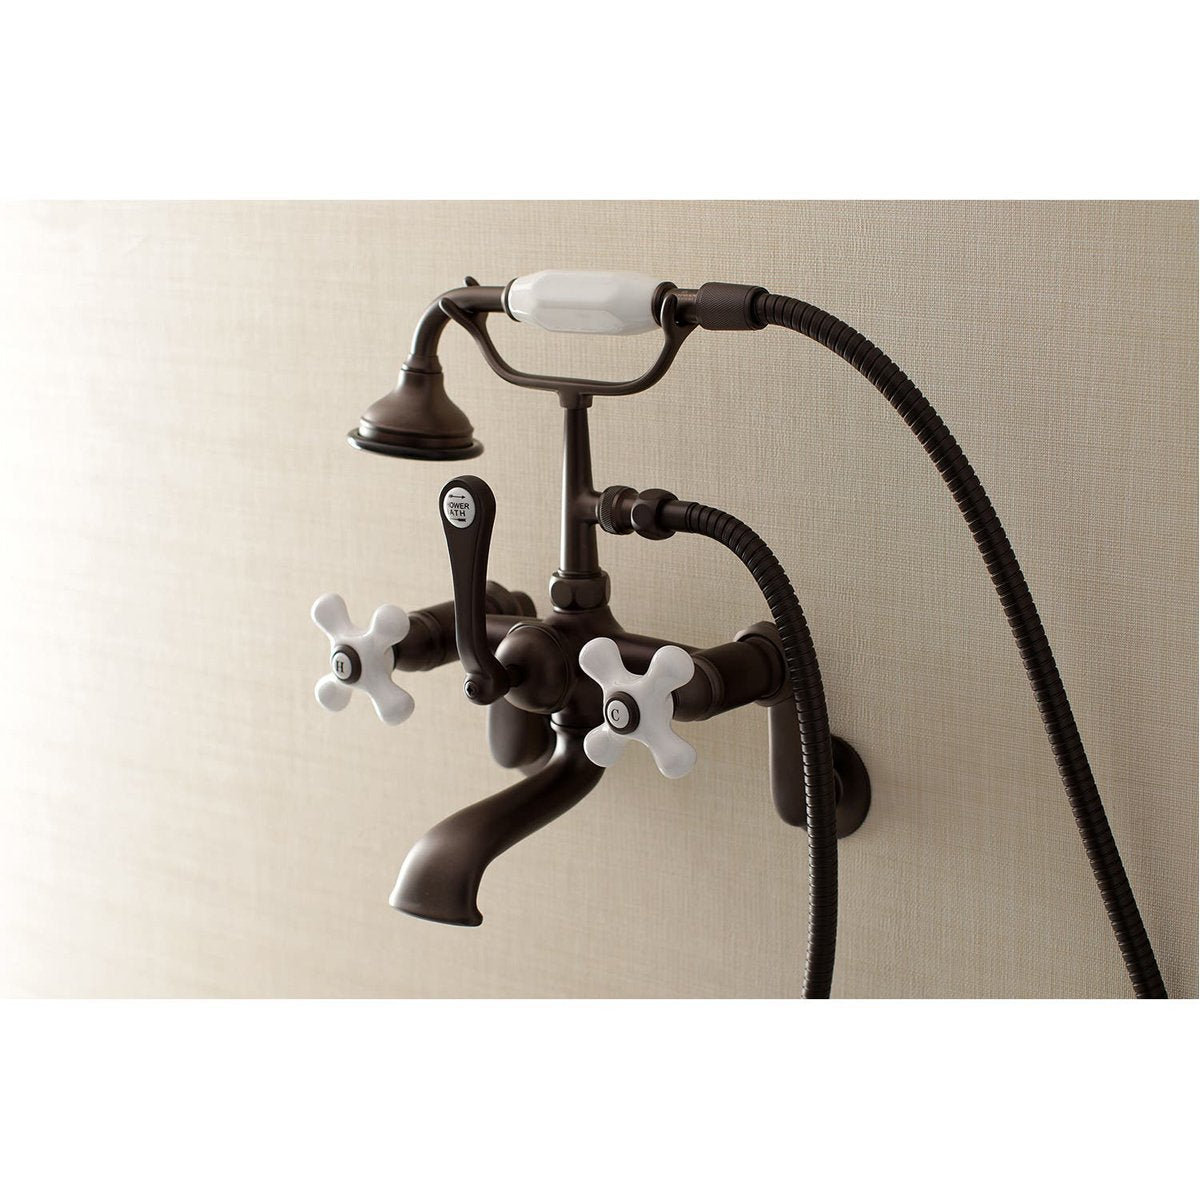 Kingston Brass Aqua Vintage 2-Hole Wall Mount Clawfoot Tub Faucet with Hand Shower